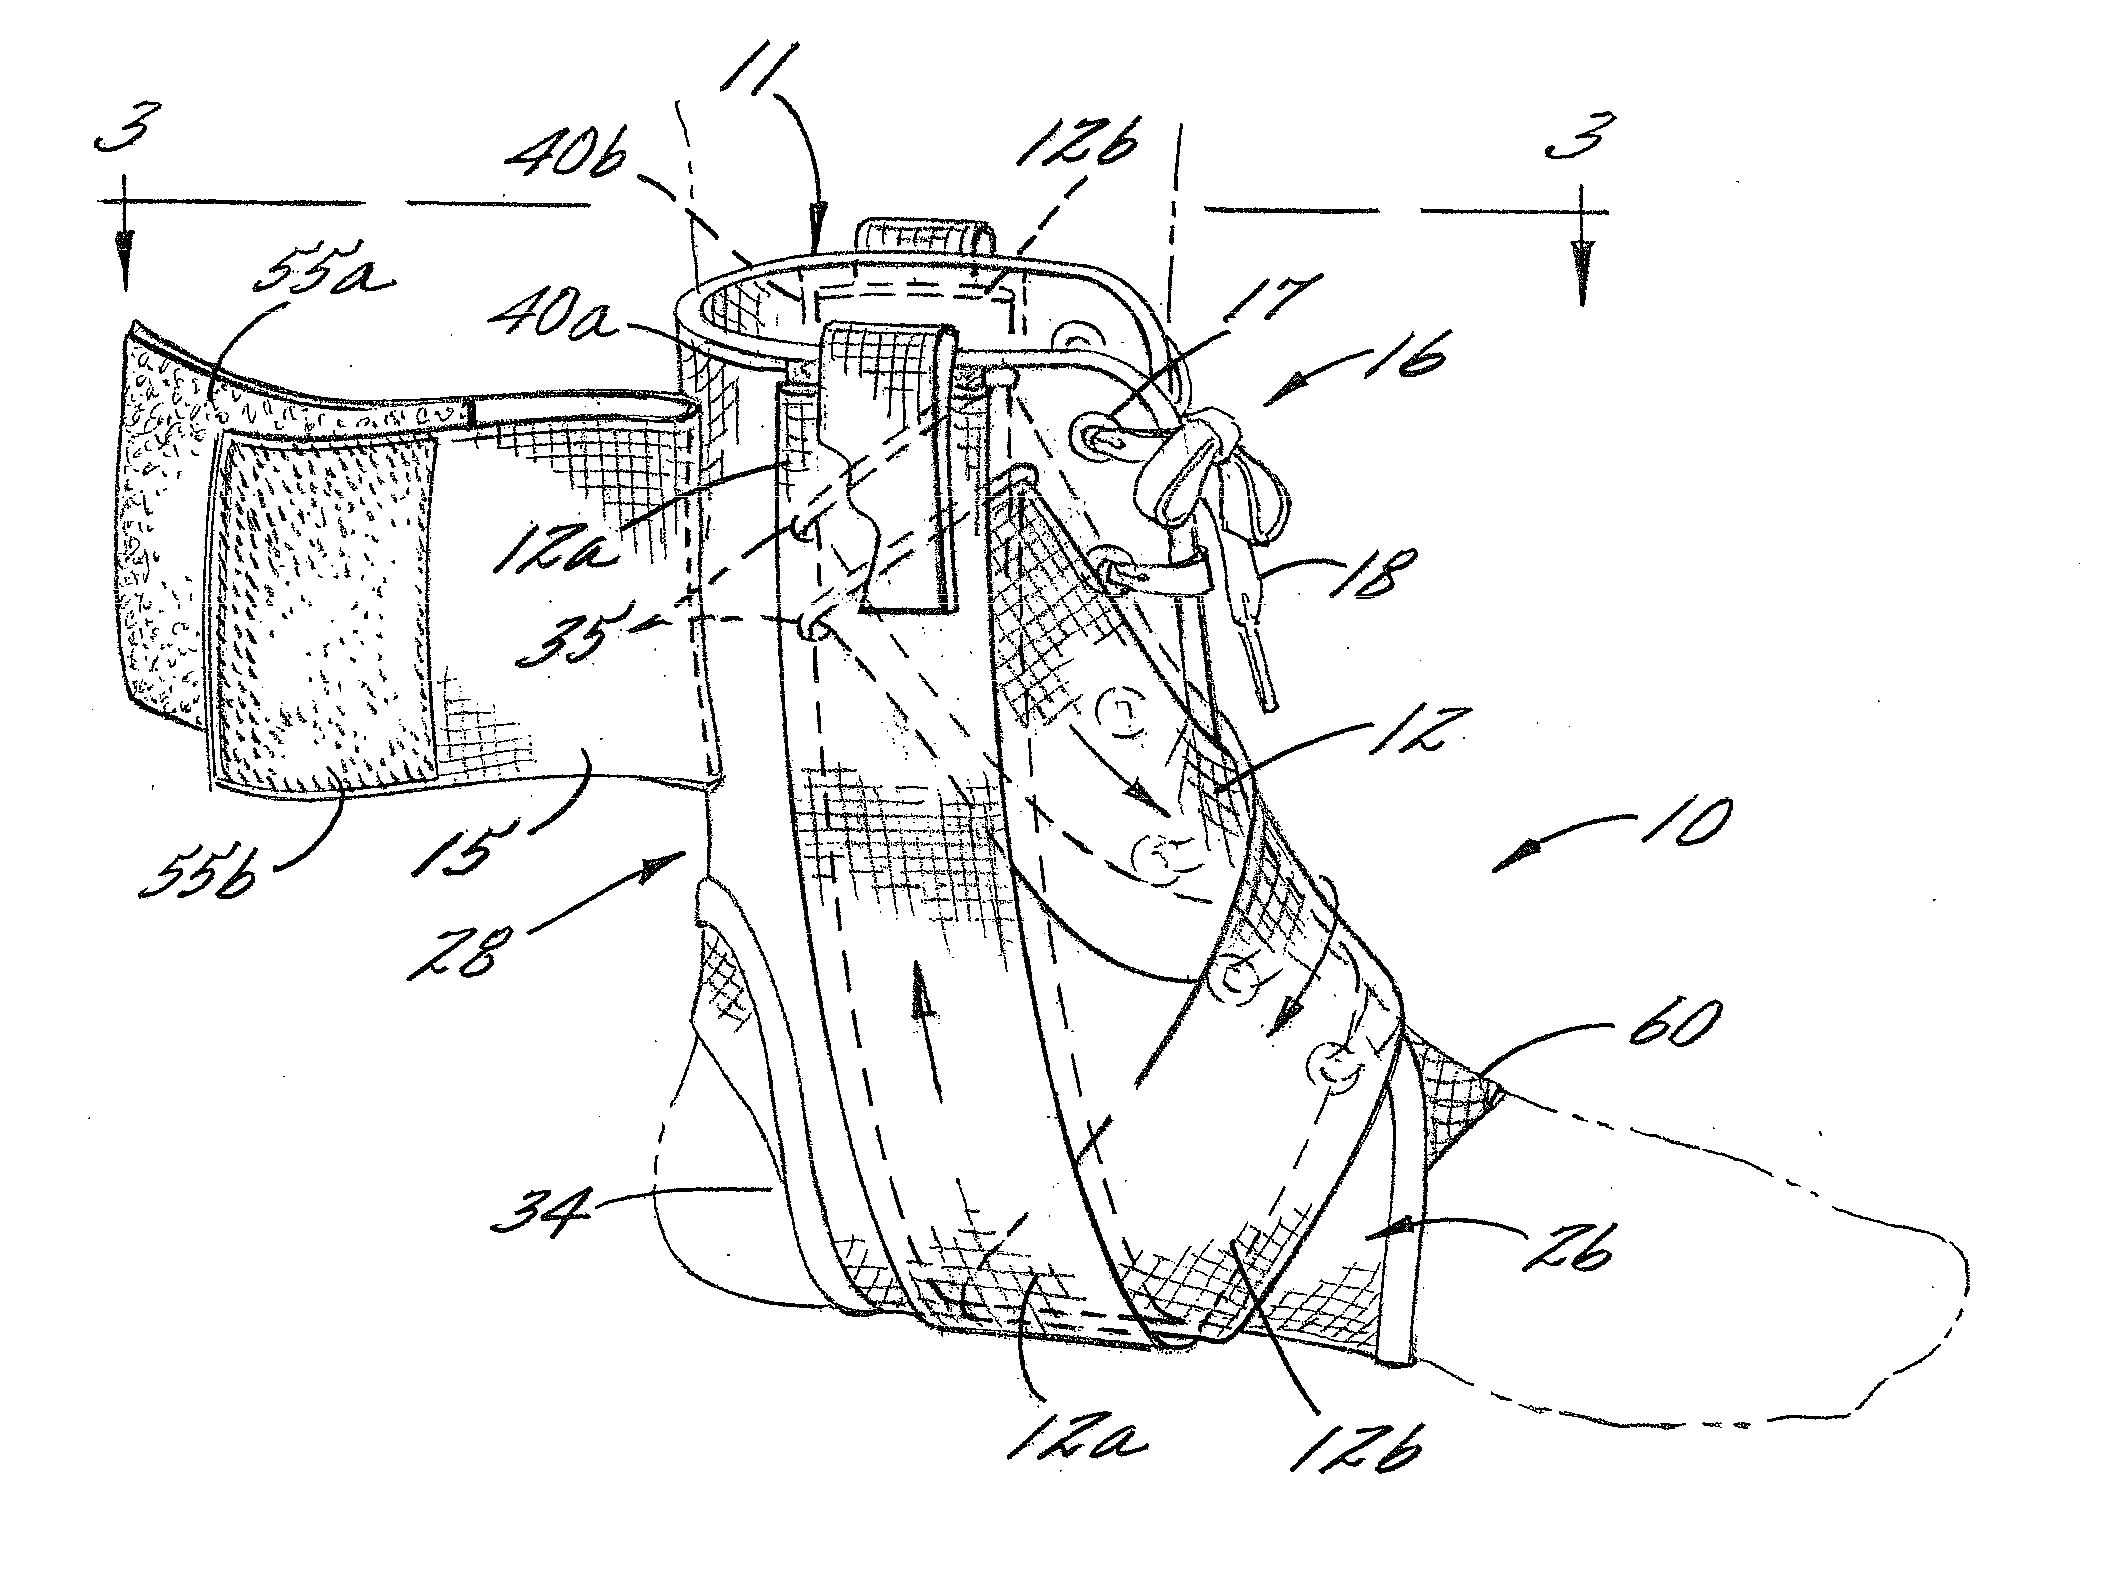 Ankle stabilizing apparatus having a dynamic cuff and stabilizing strap system